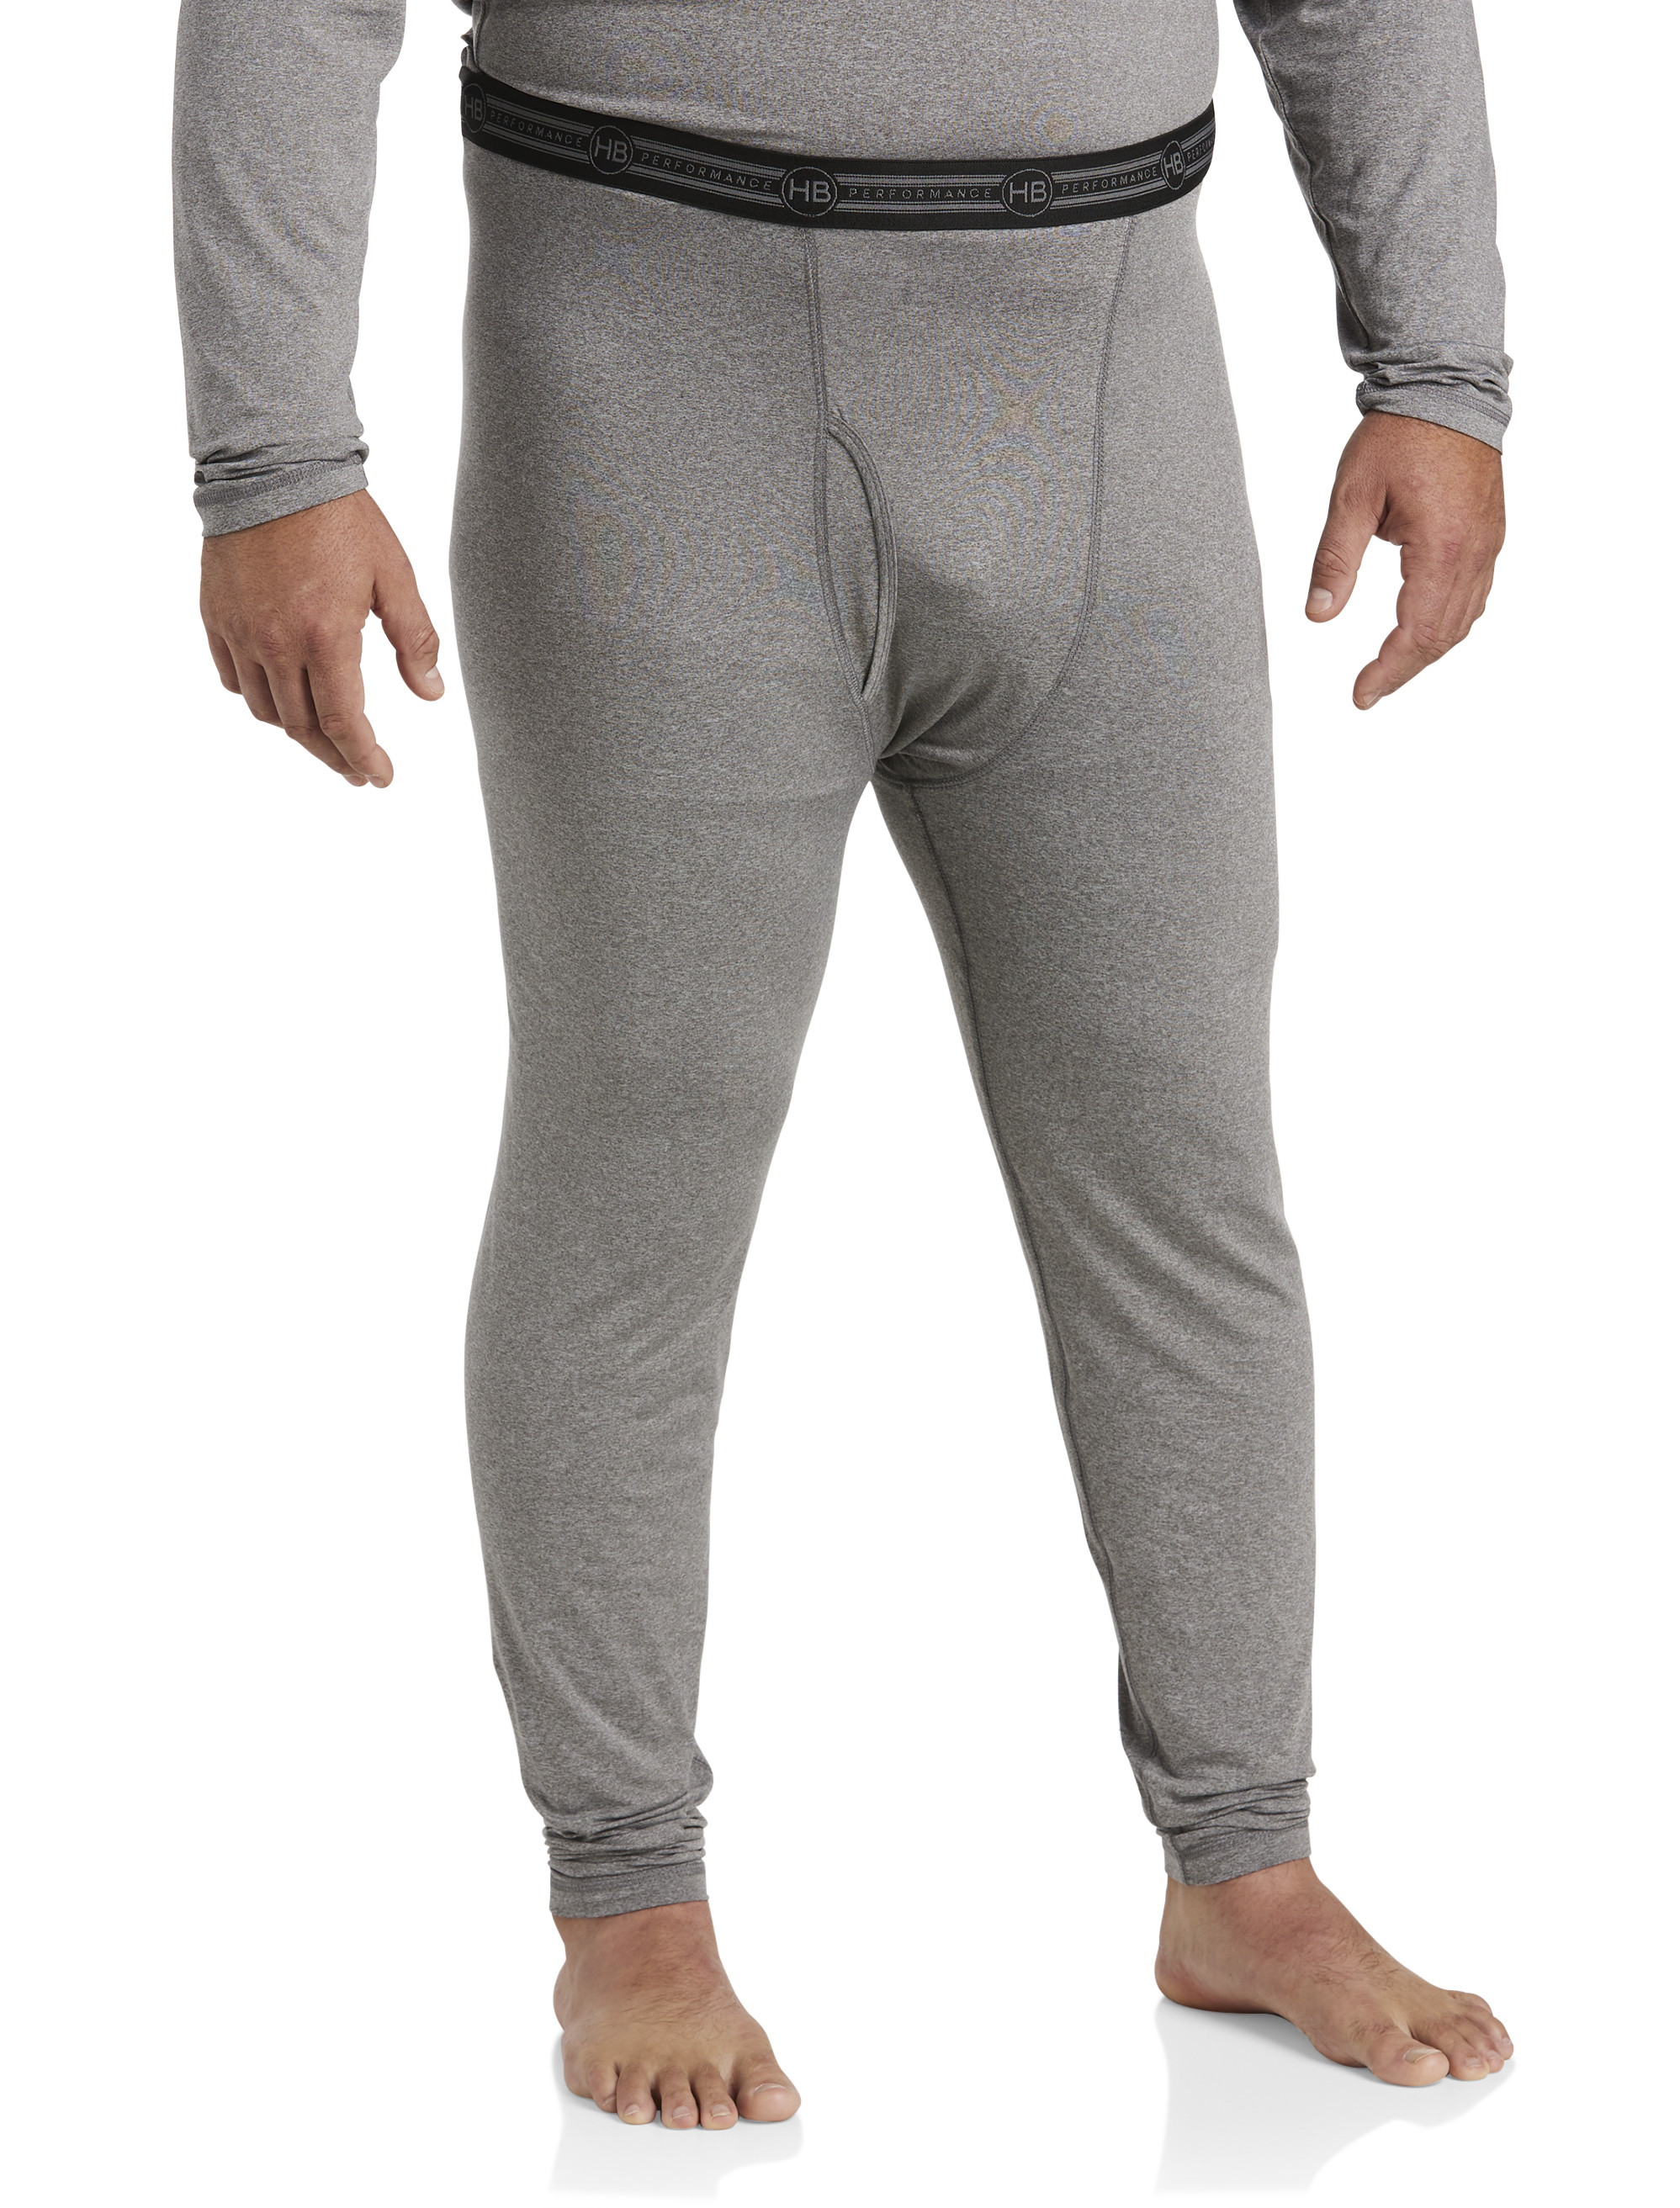 Big + Tall  Harbor Bay Colder Weather Level 2 Performance Thermal